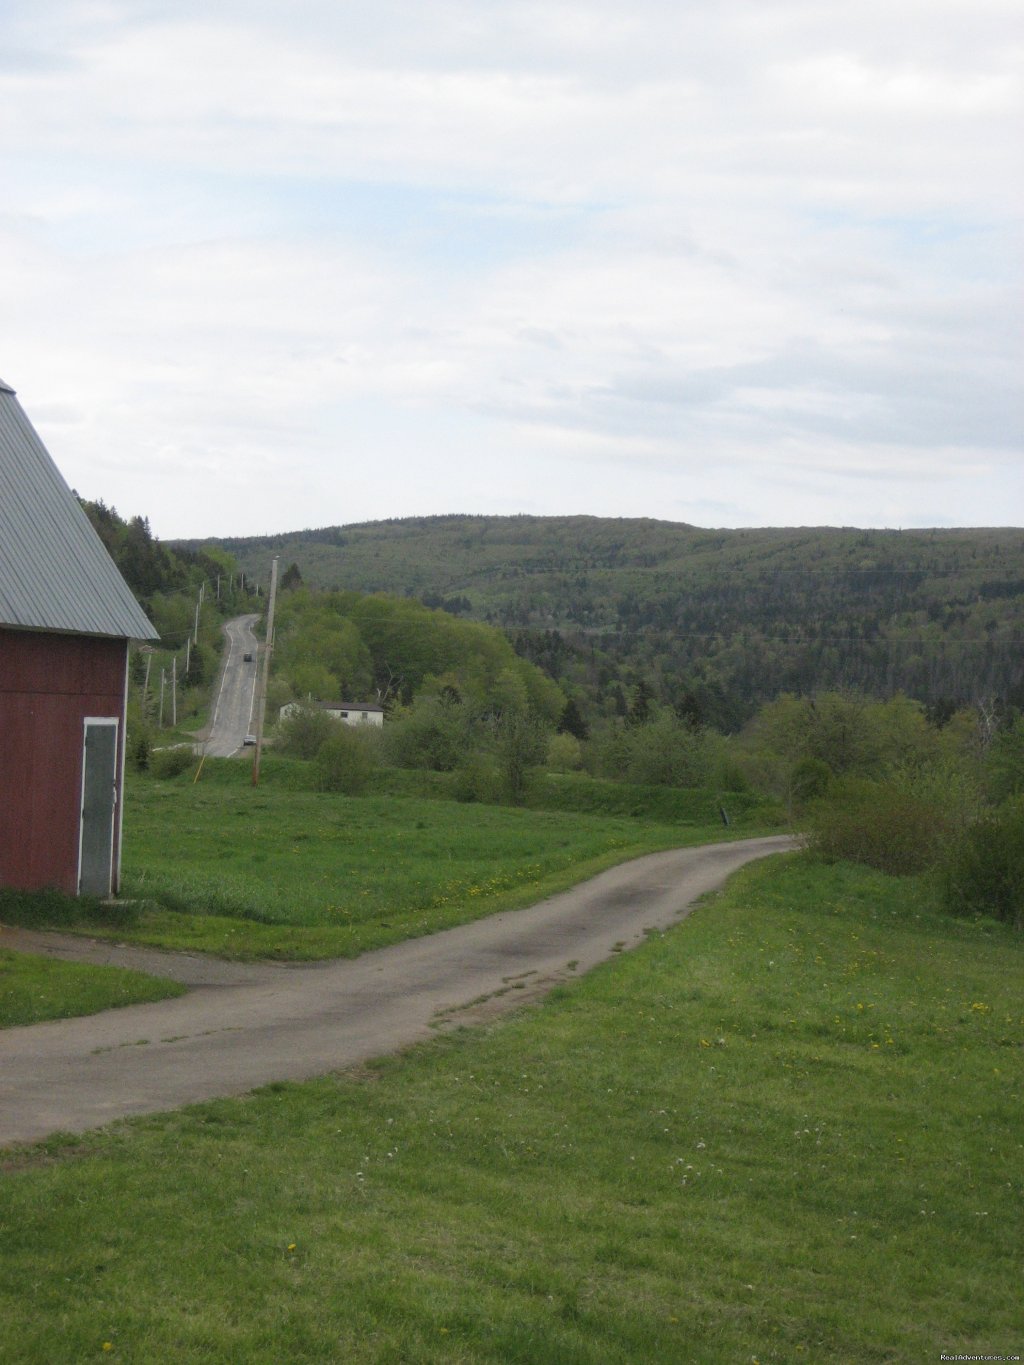 Driveway to Route 395 | Farmhouse Vacation Rental in Cape Breton | Image #2/21 | 